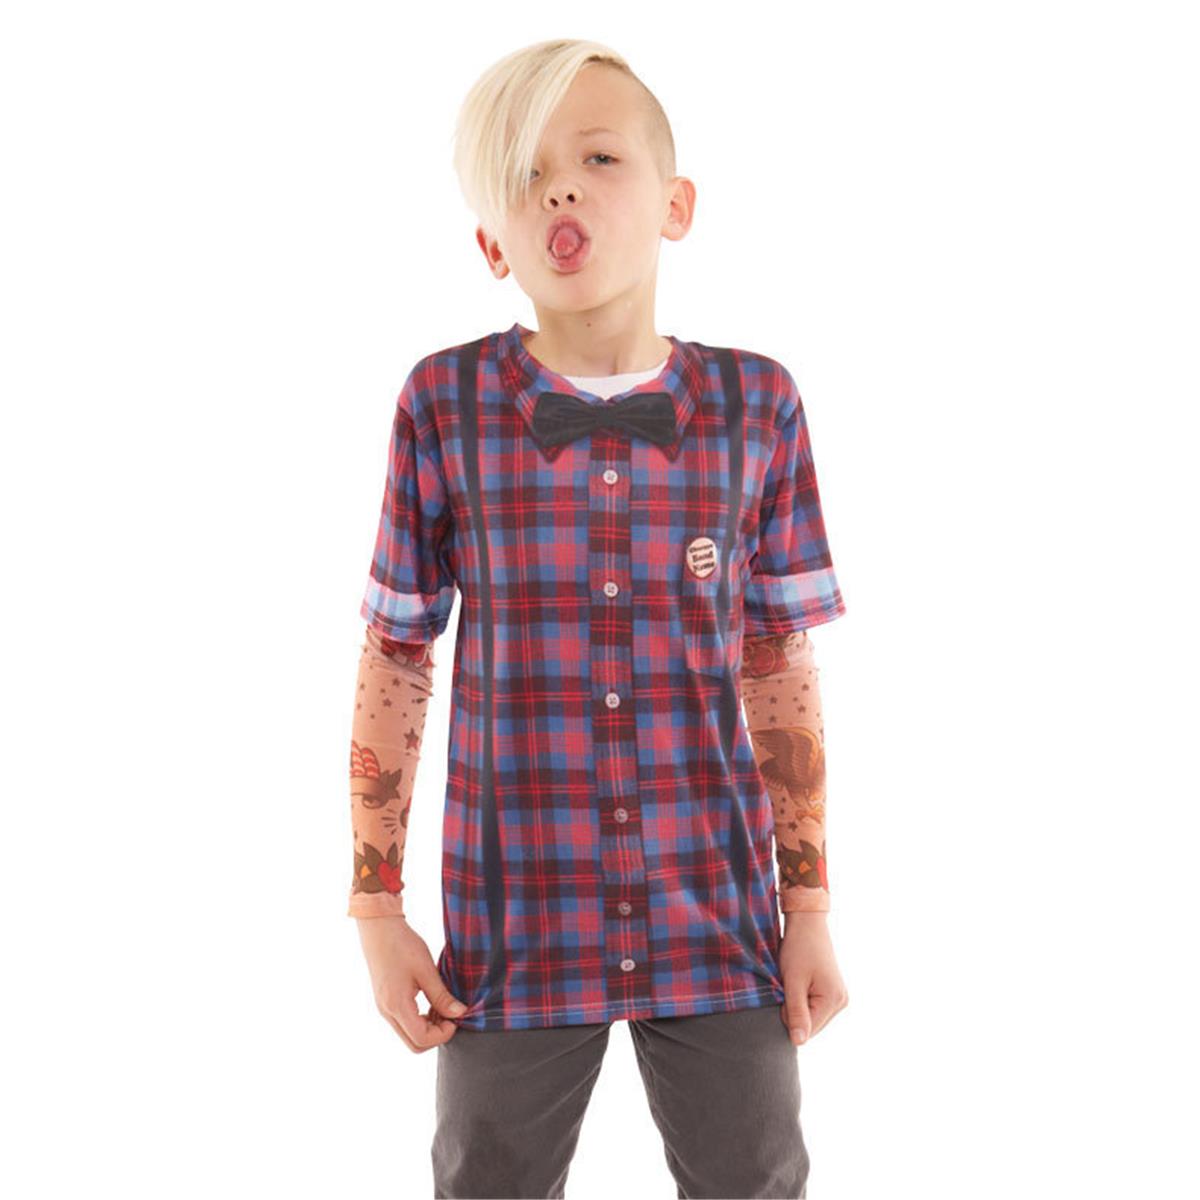 F134202-s Youth Hipster Bow Tie & Suspenders Tattoo Tee With Mesh Sleeves - Small